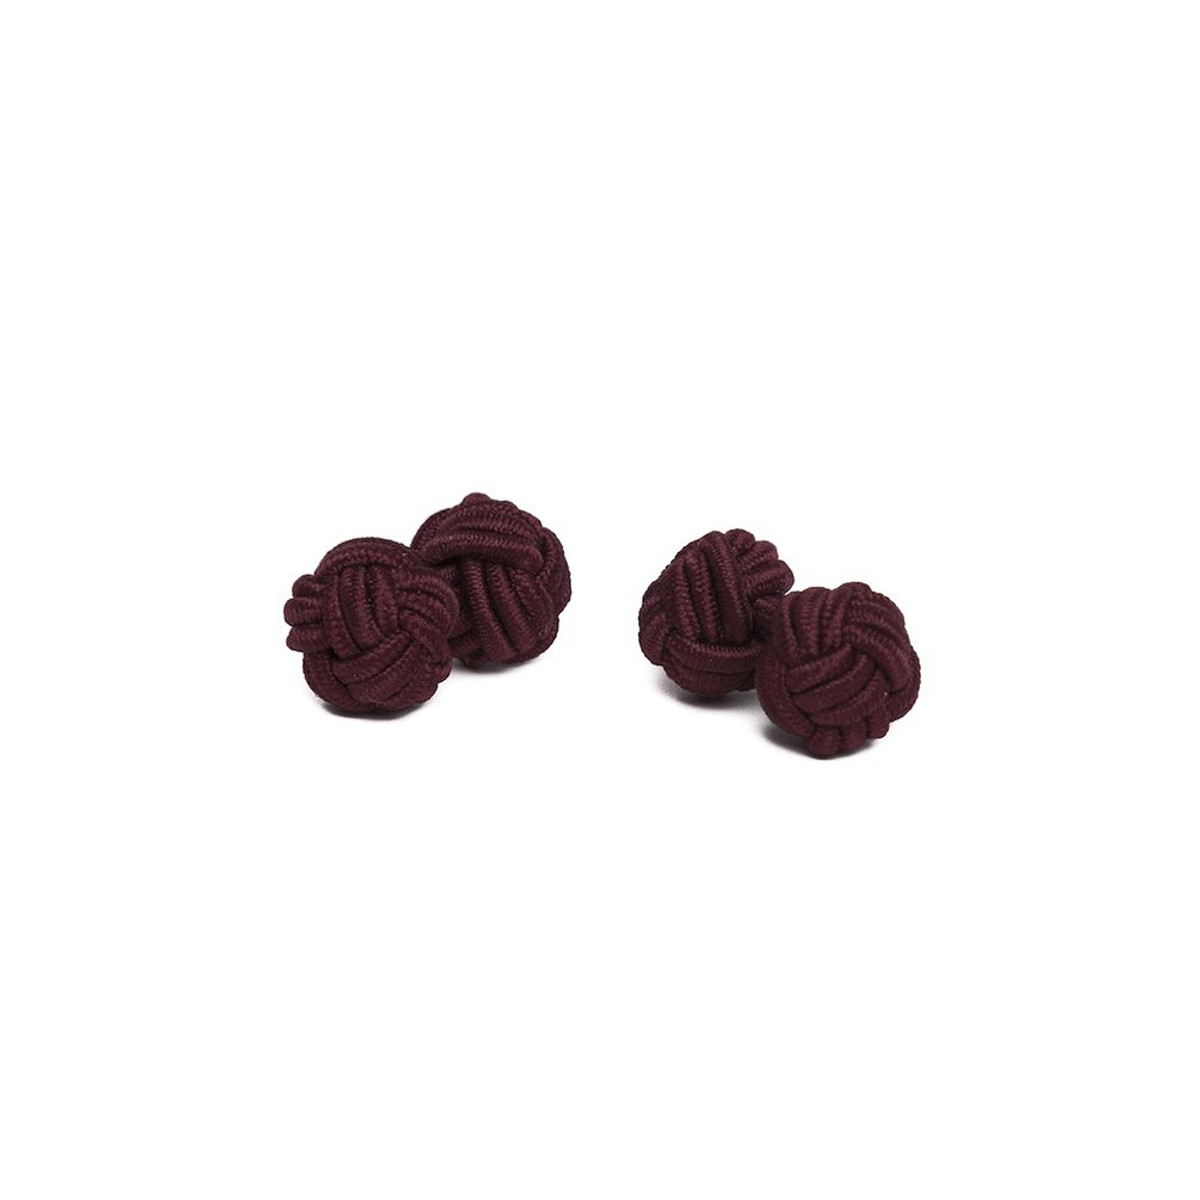 Pair of Solid Color Silk Knot Cufflinks - Burgundy Wine